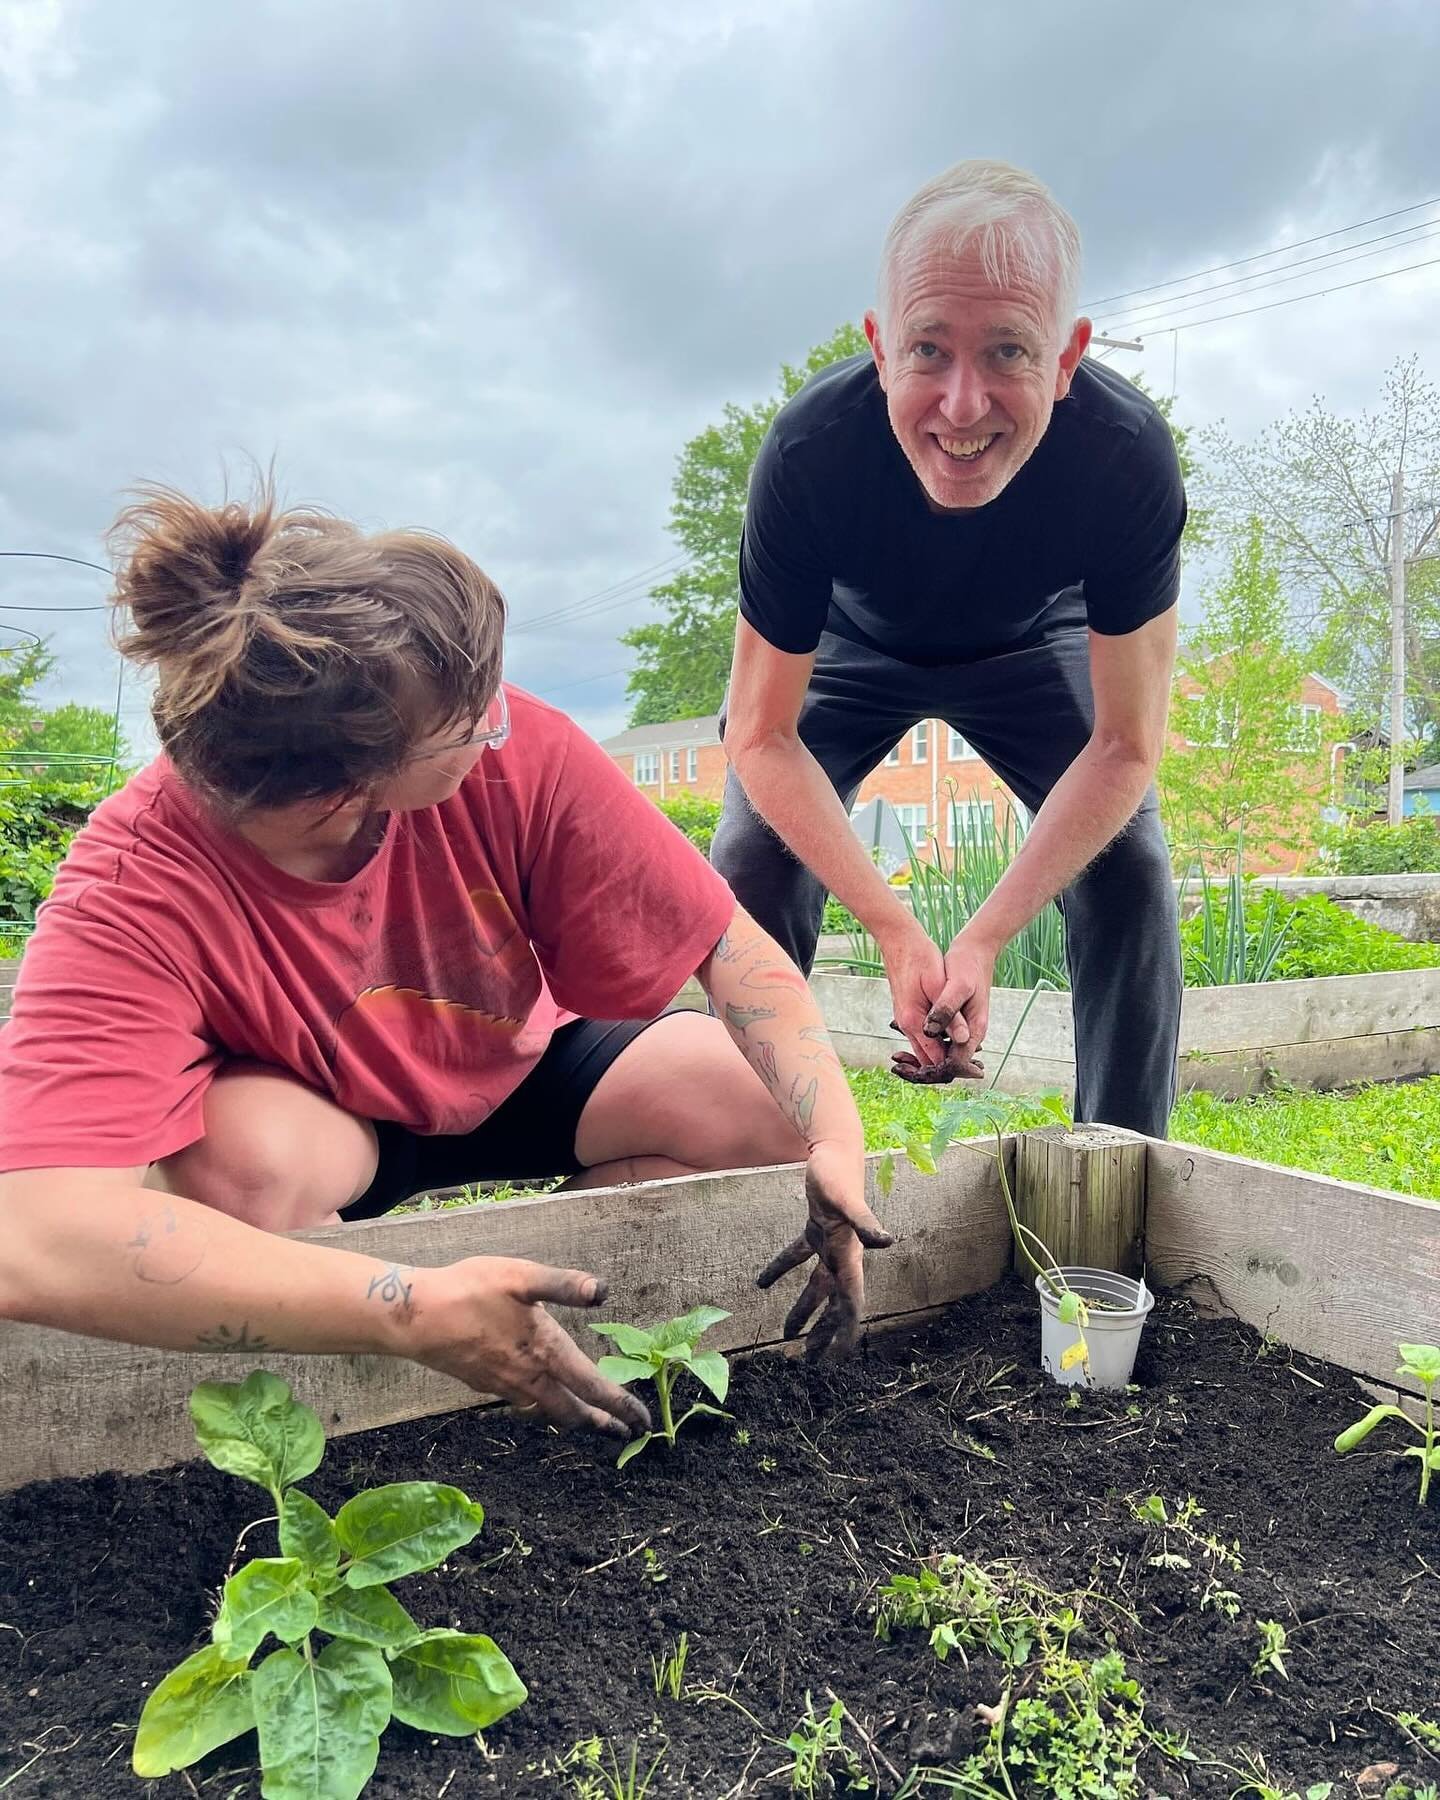 Exciting news! In collaboration with Intersect Arts Center (@intersectartscenter) and the Saint Louis Sudbury School community, we&rsquo;ve planted sunflowers, kale, swiss chard, tomatoes, peppers, and more in the beautiful garden outside our space. 